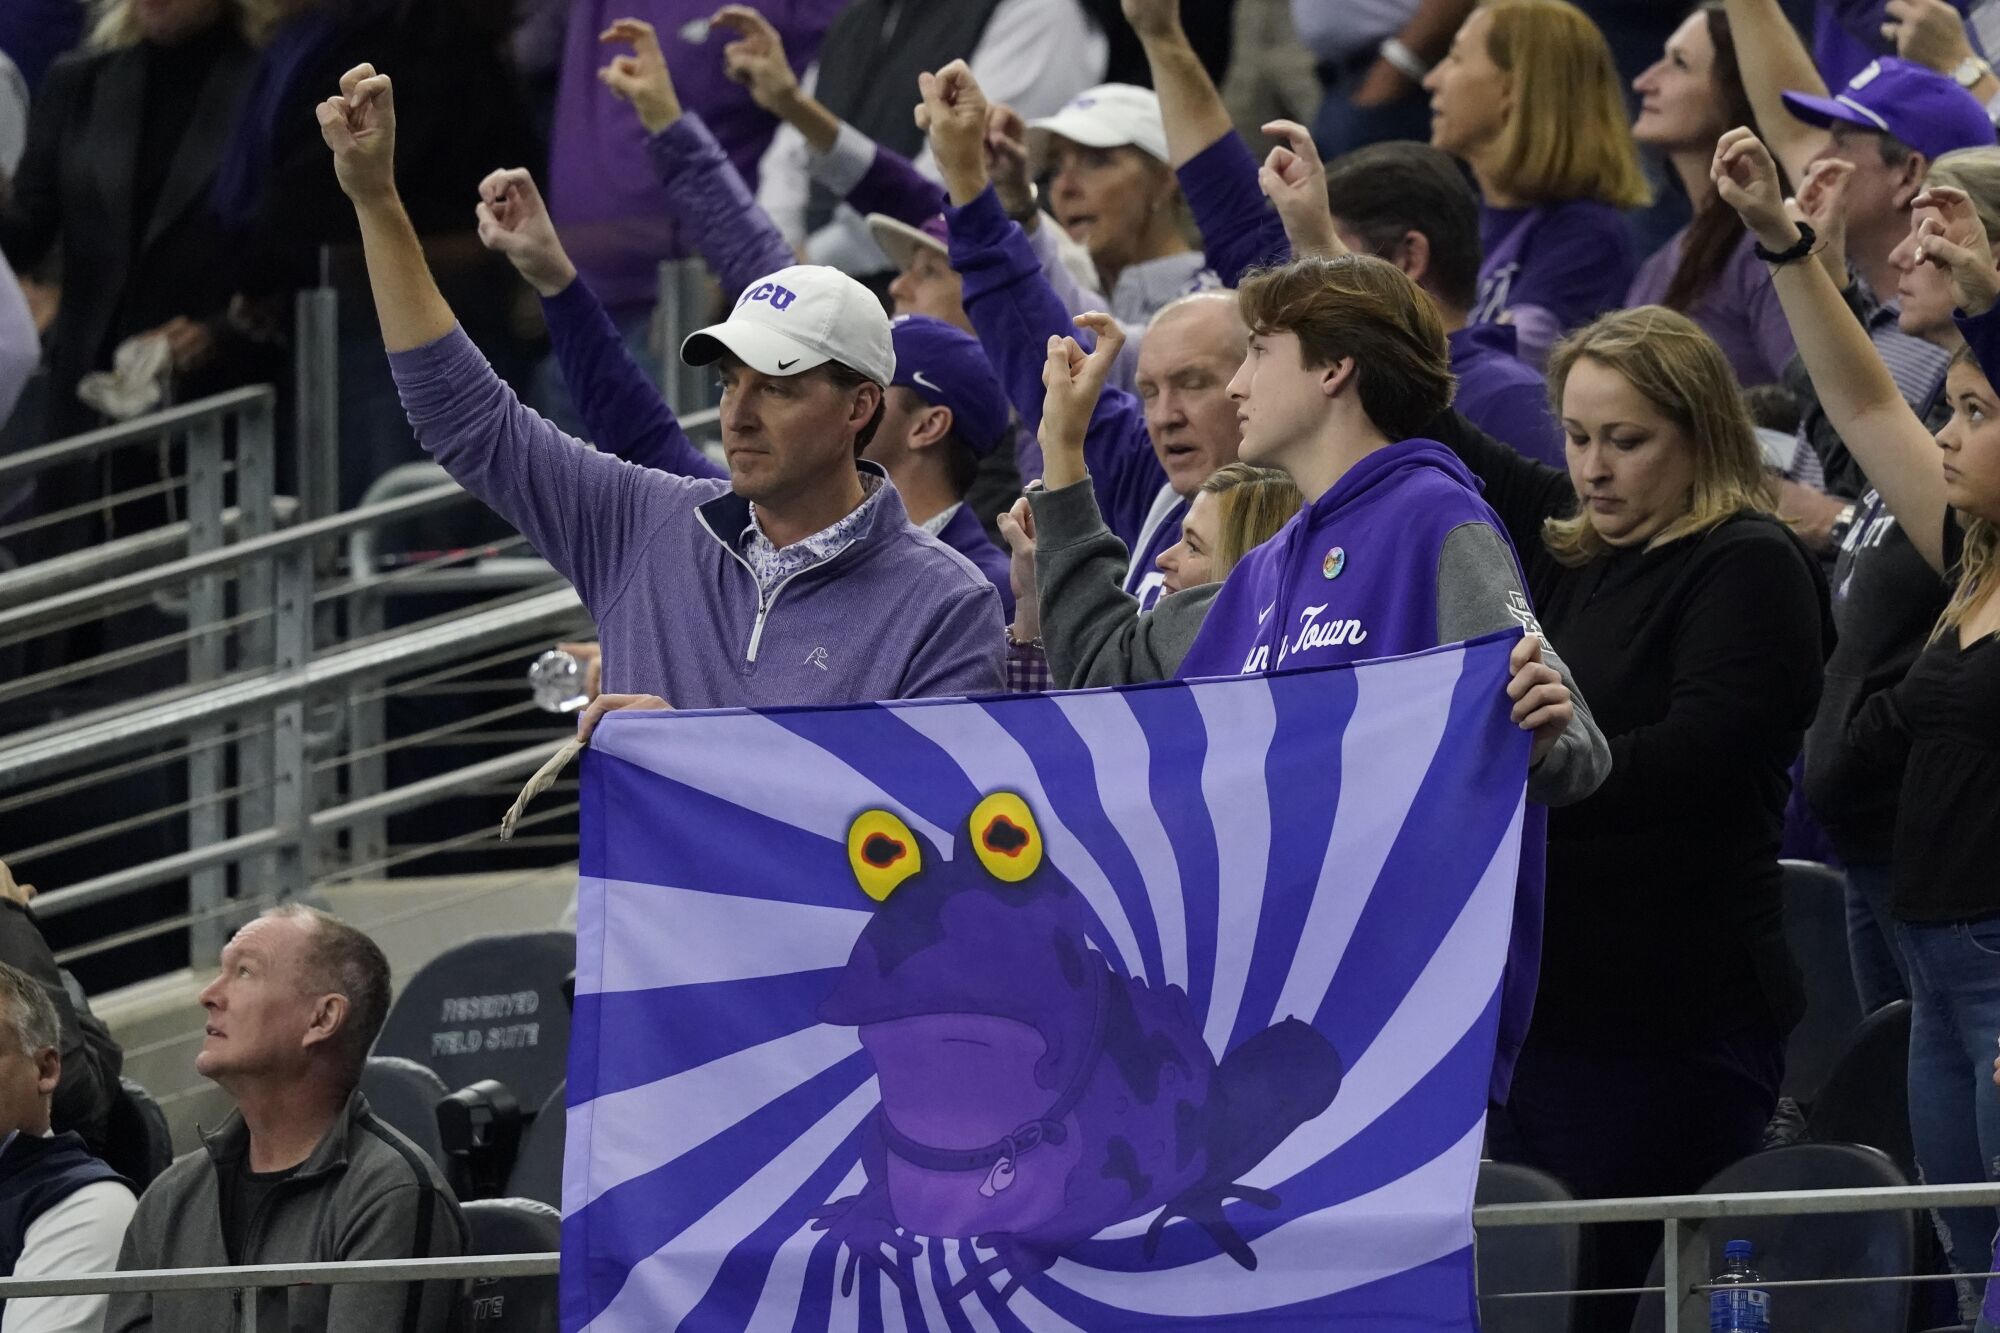 TCU fans hold up a hypnotoad flag and cheer during the Big 12 conference championship game